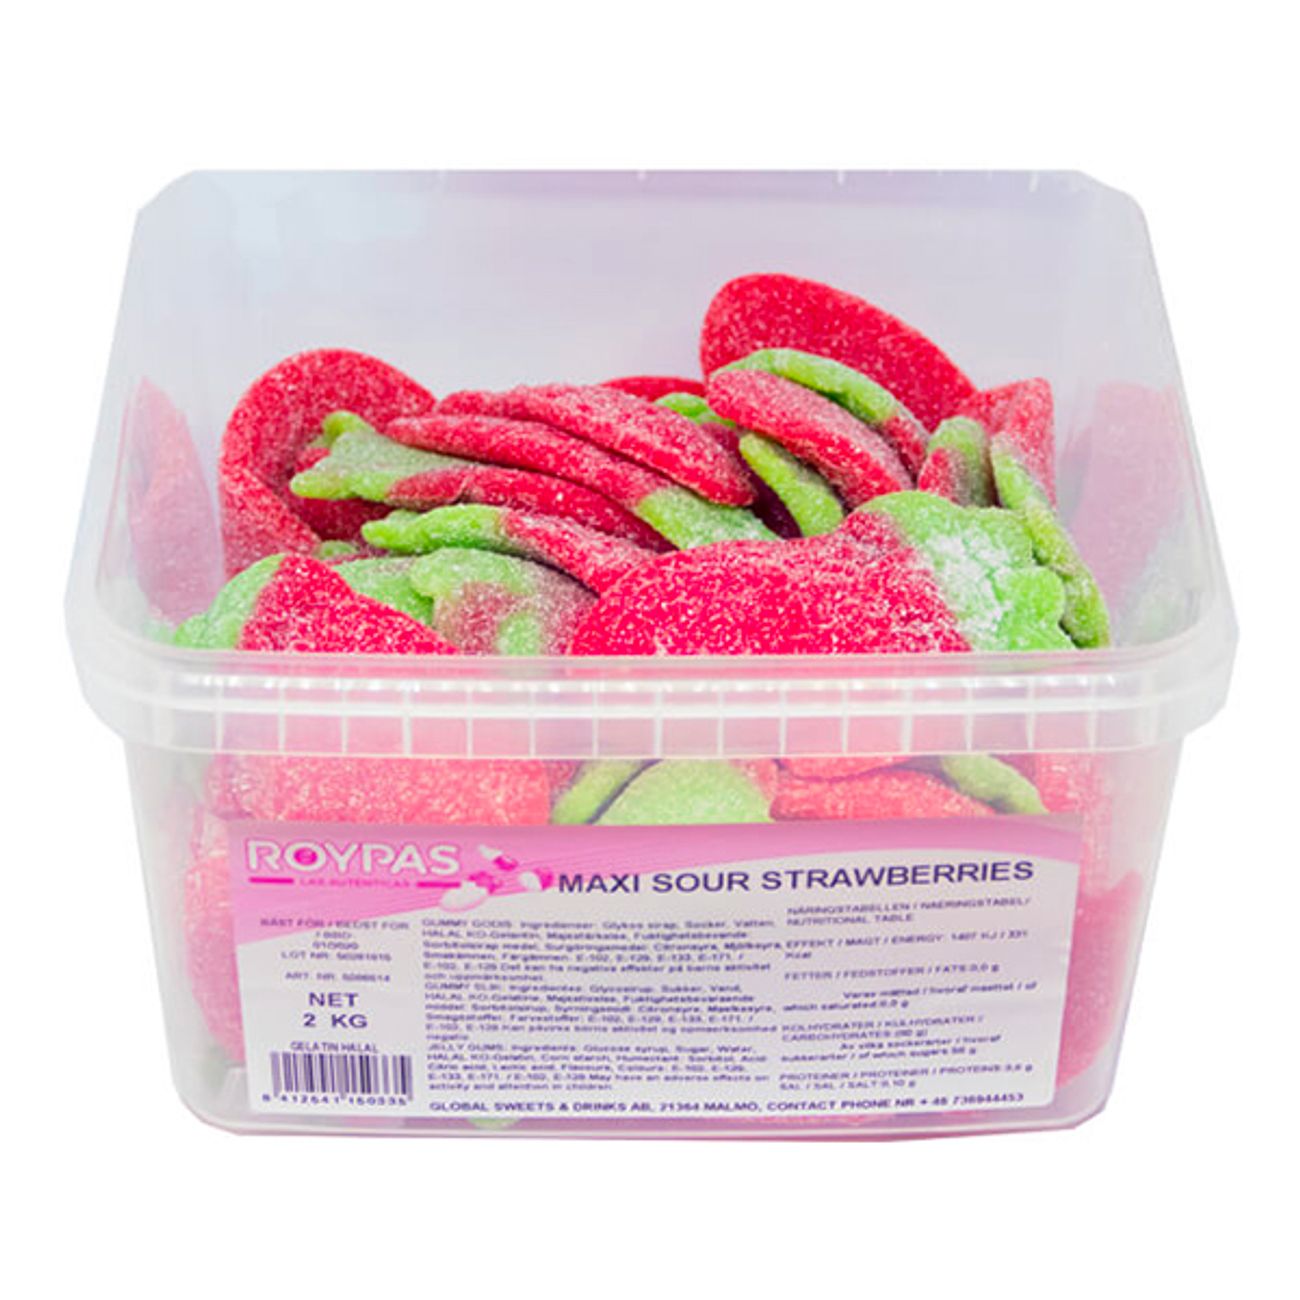 maxi-sour-strawberries-storpack-74751-1